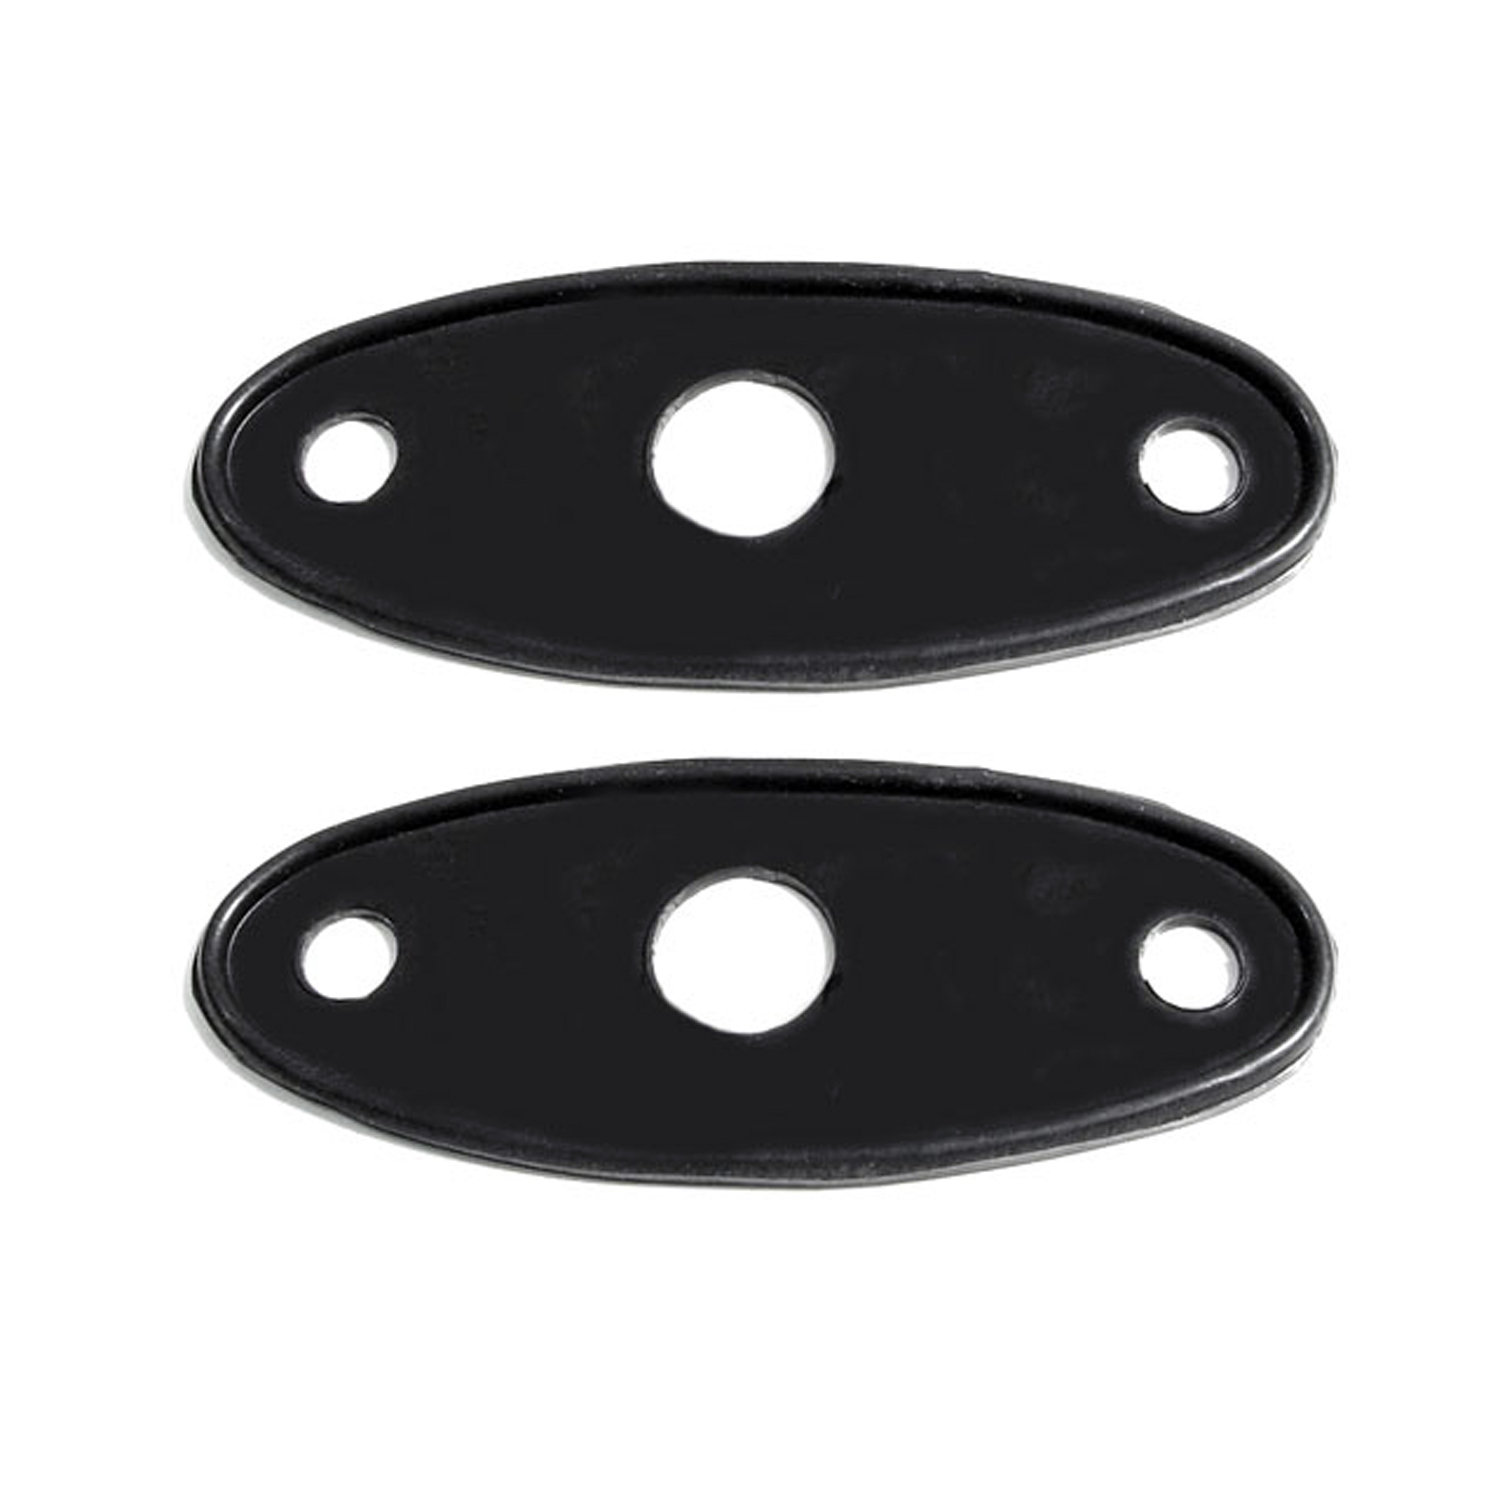 1929 Reo Flying Cloud Side Tire Bracket Mounting Pads.  1-1/2 wide X 3-4/8 long-MP 993-C